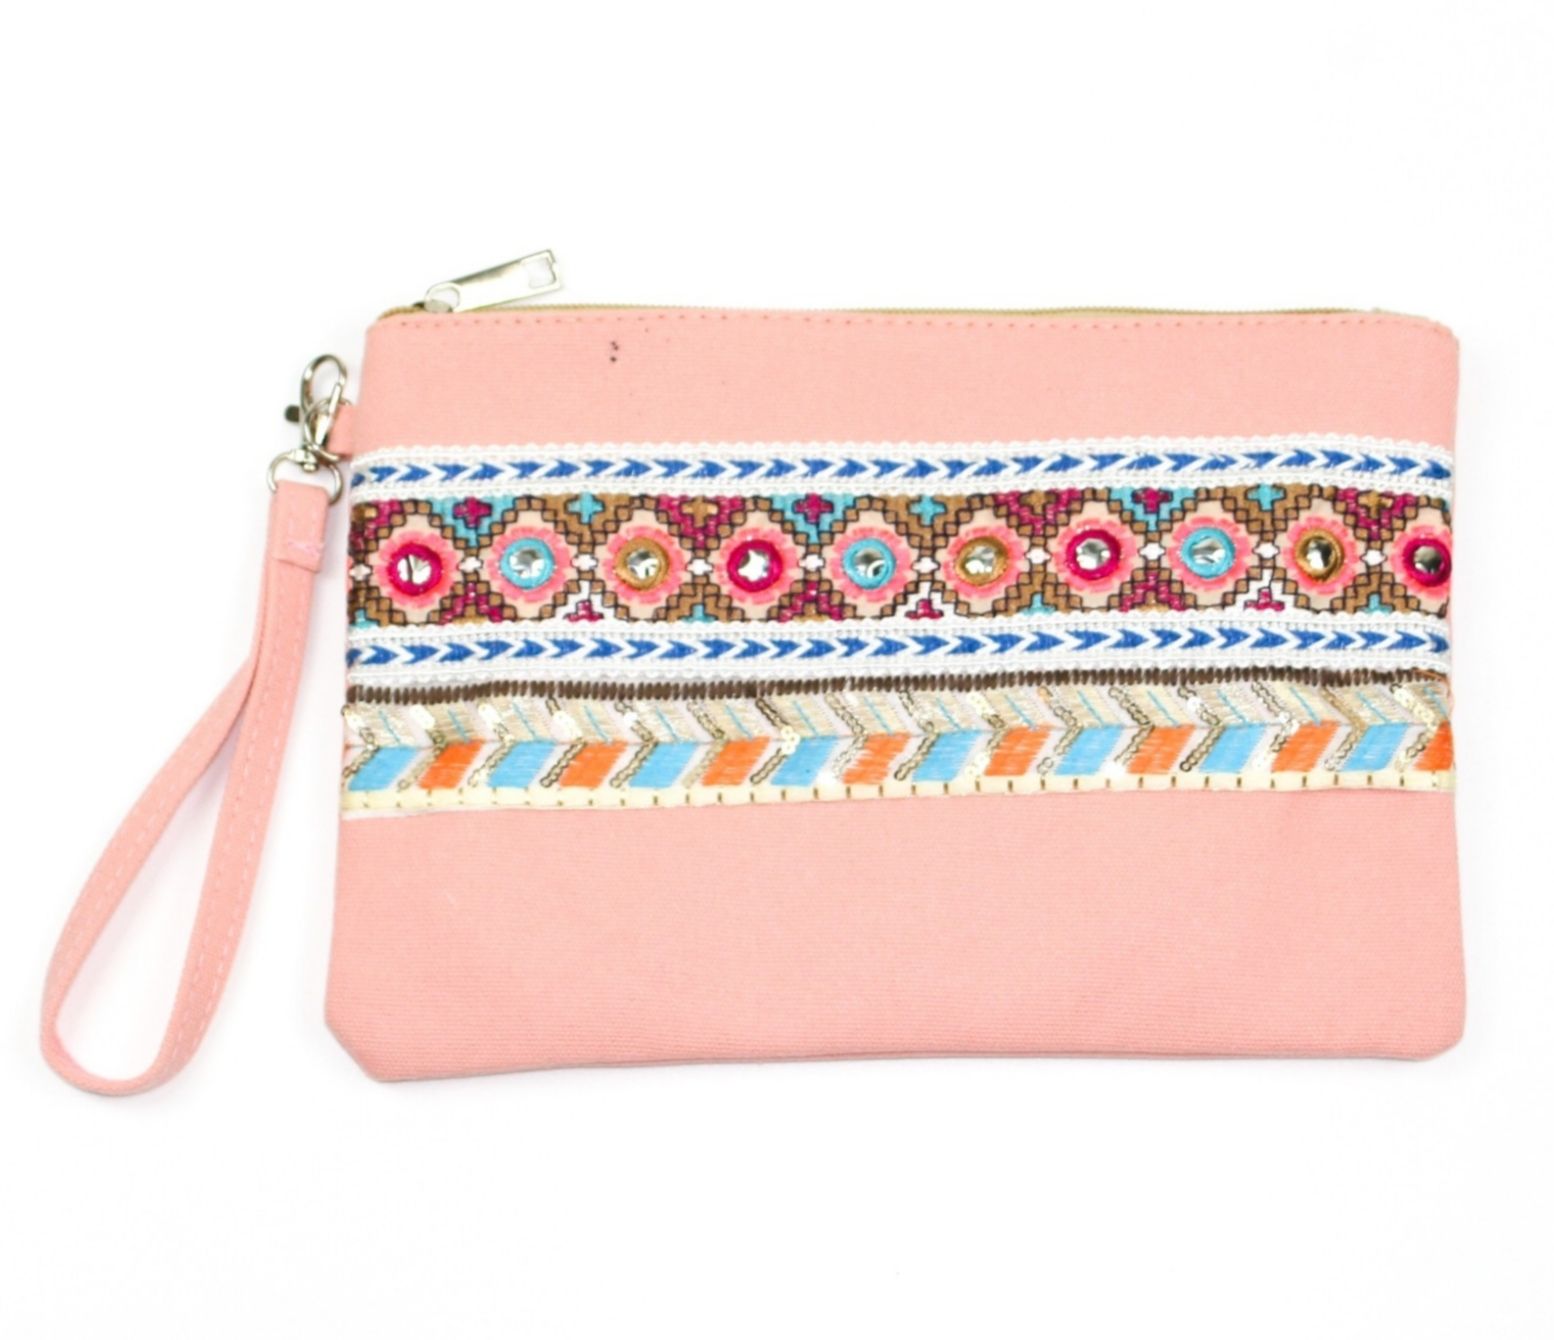 BOHO style clutch bag with zip fastening and detachable hand strap ...